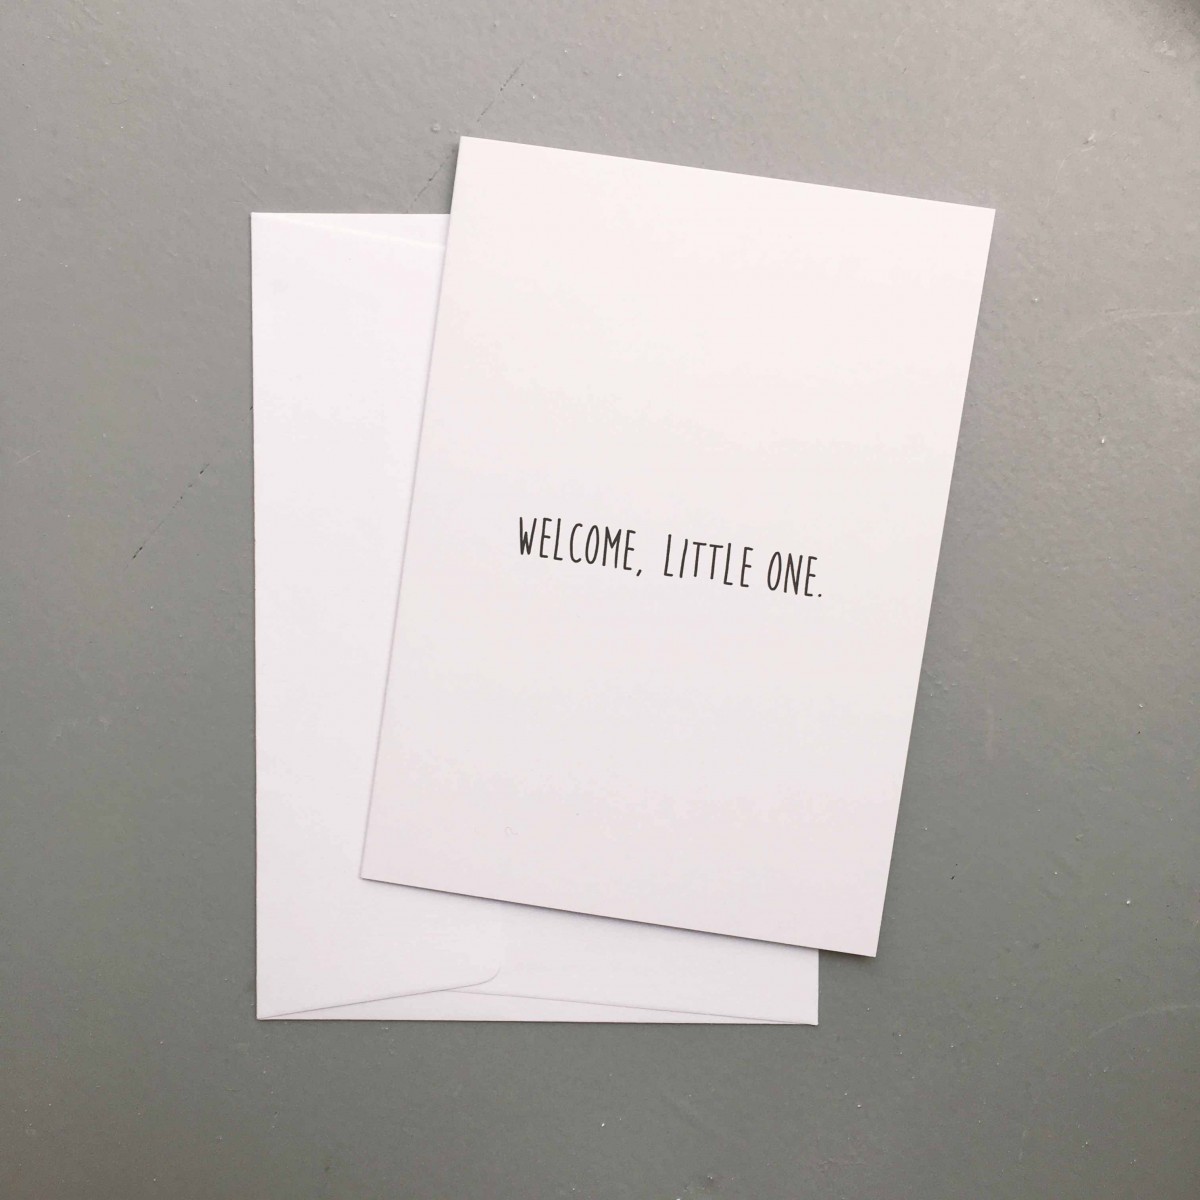 Love is the new black – Grußkarte "Welcome little one"